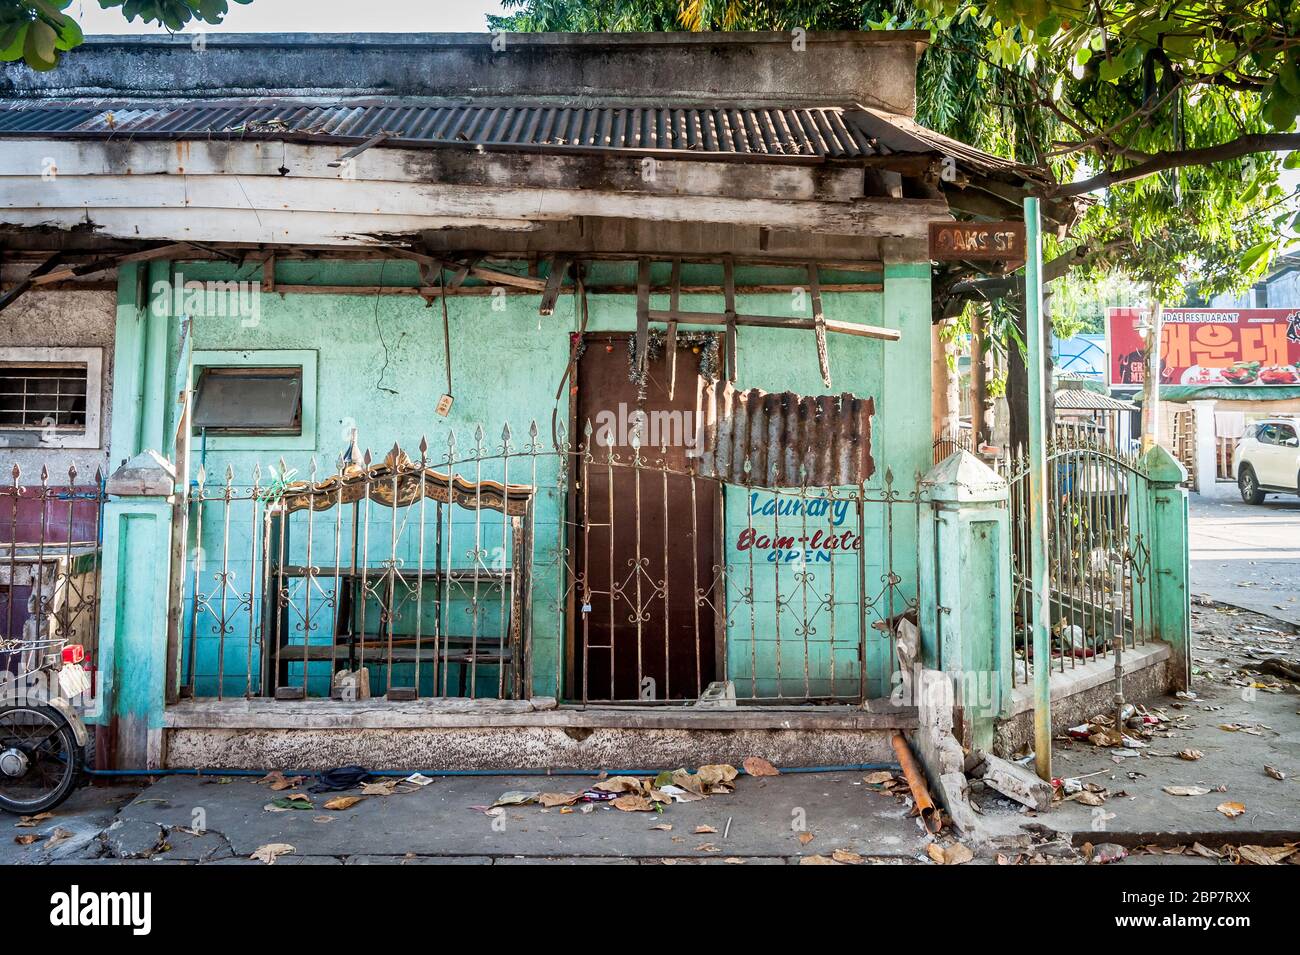 An old house once used as a laundry shop in ruin in Angeles City Philippines. Stock Photo